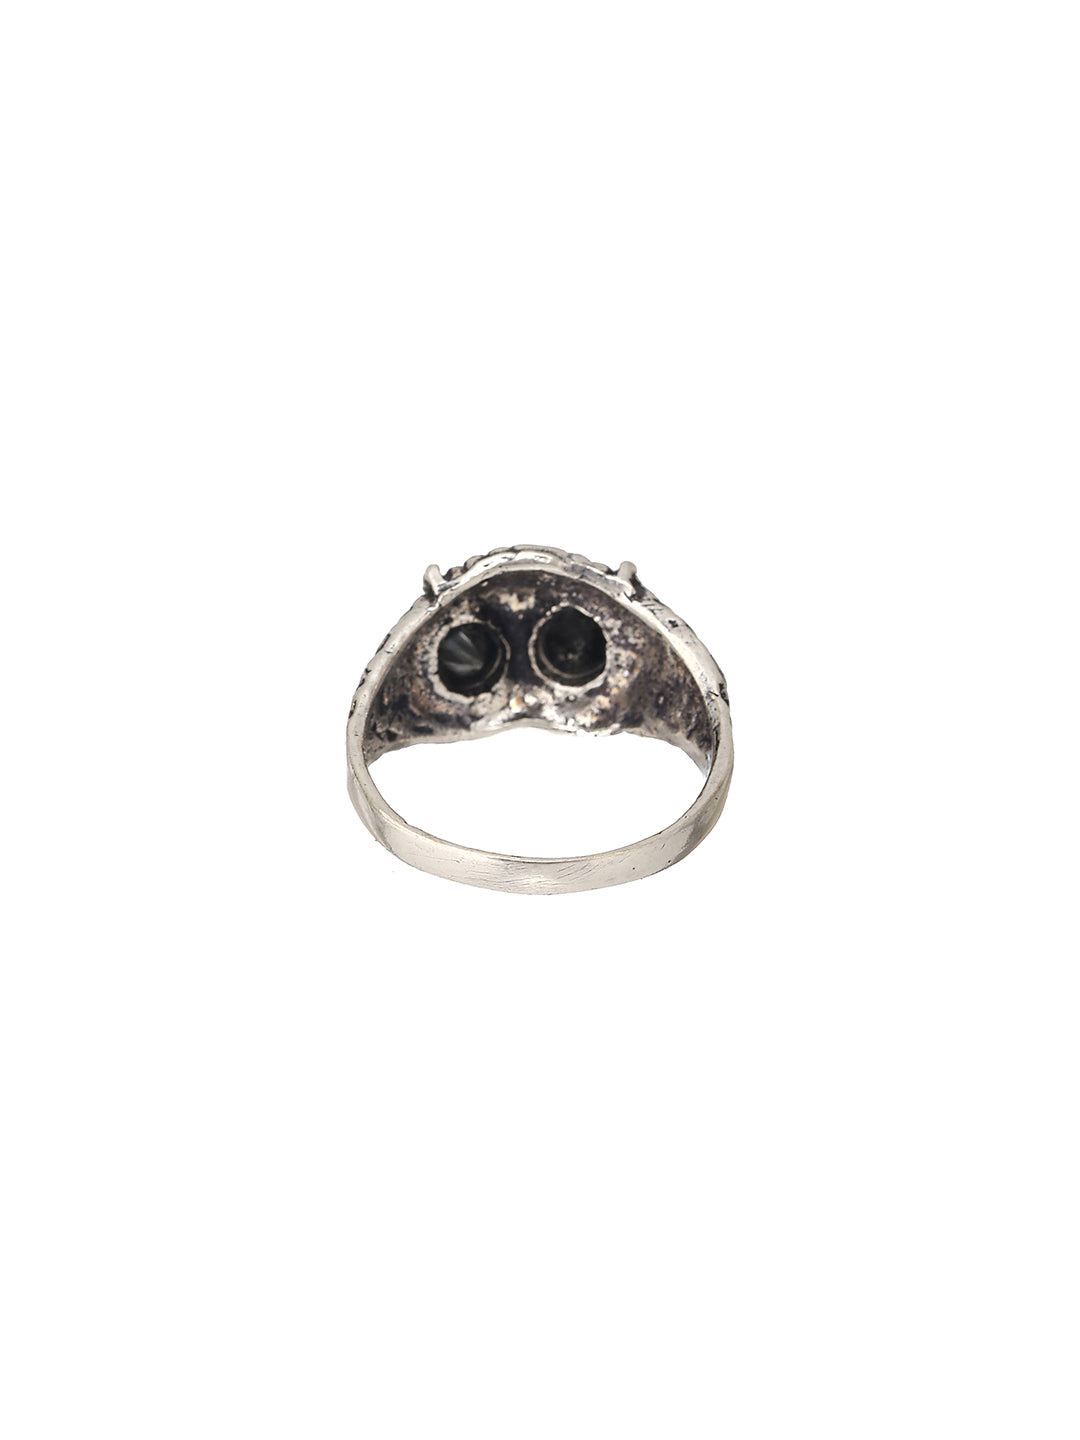 Bold by Priyaasi Black-Eyed Owl Studded Silver-Plated Ring for Men